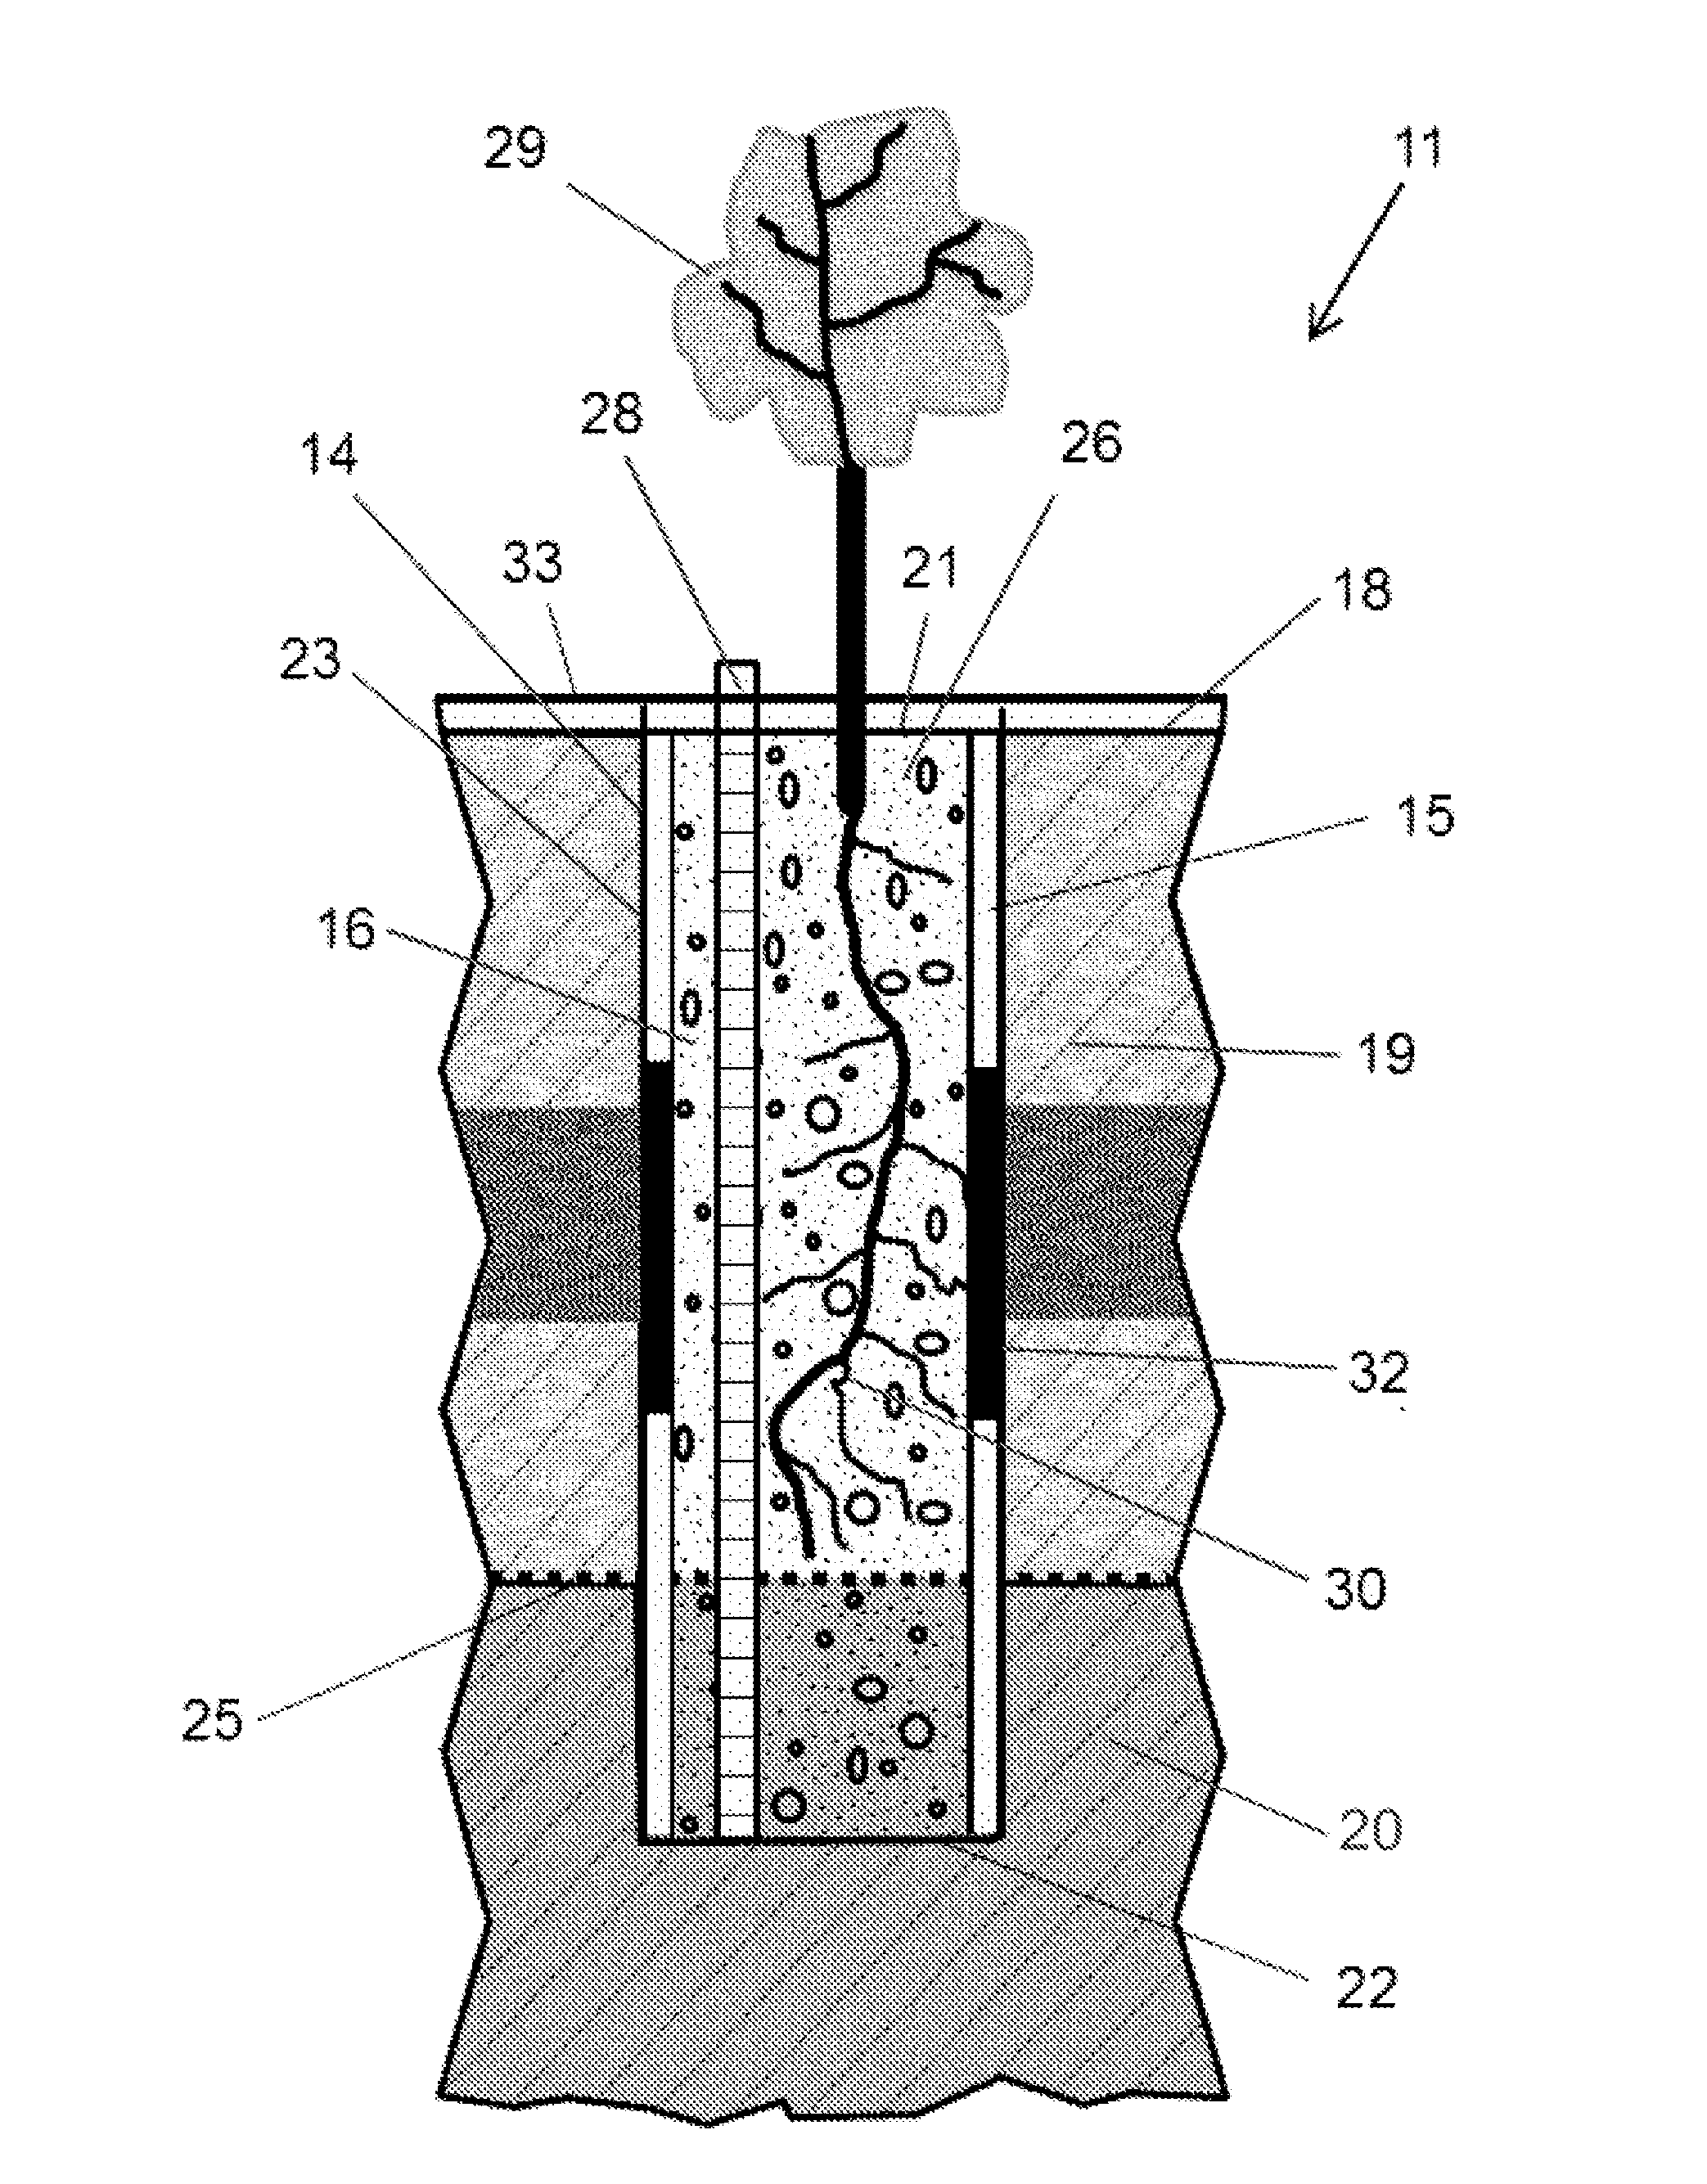 Groundwater remediation system and method